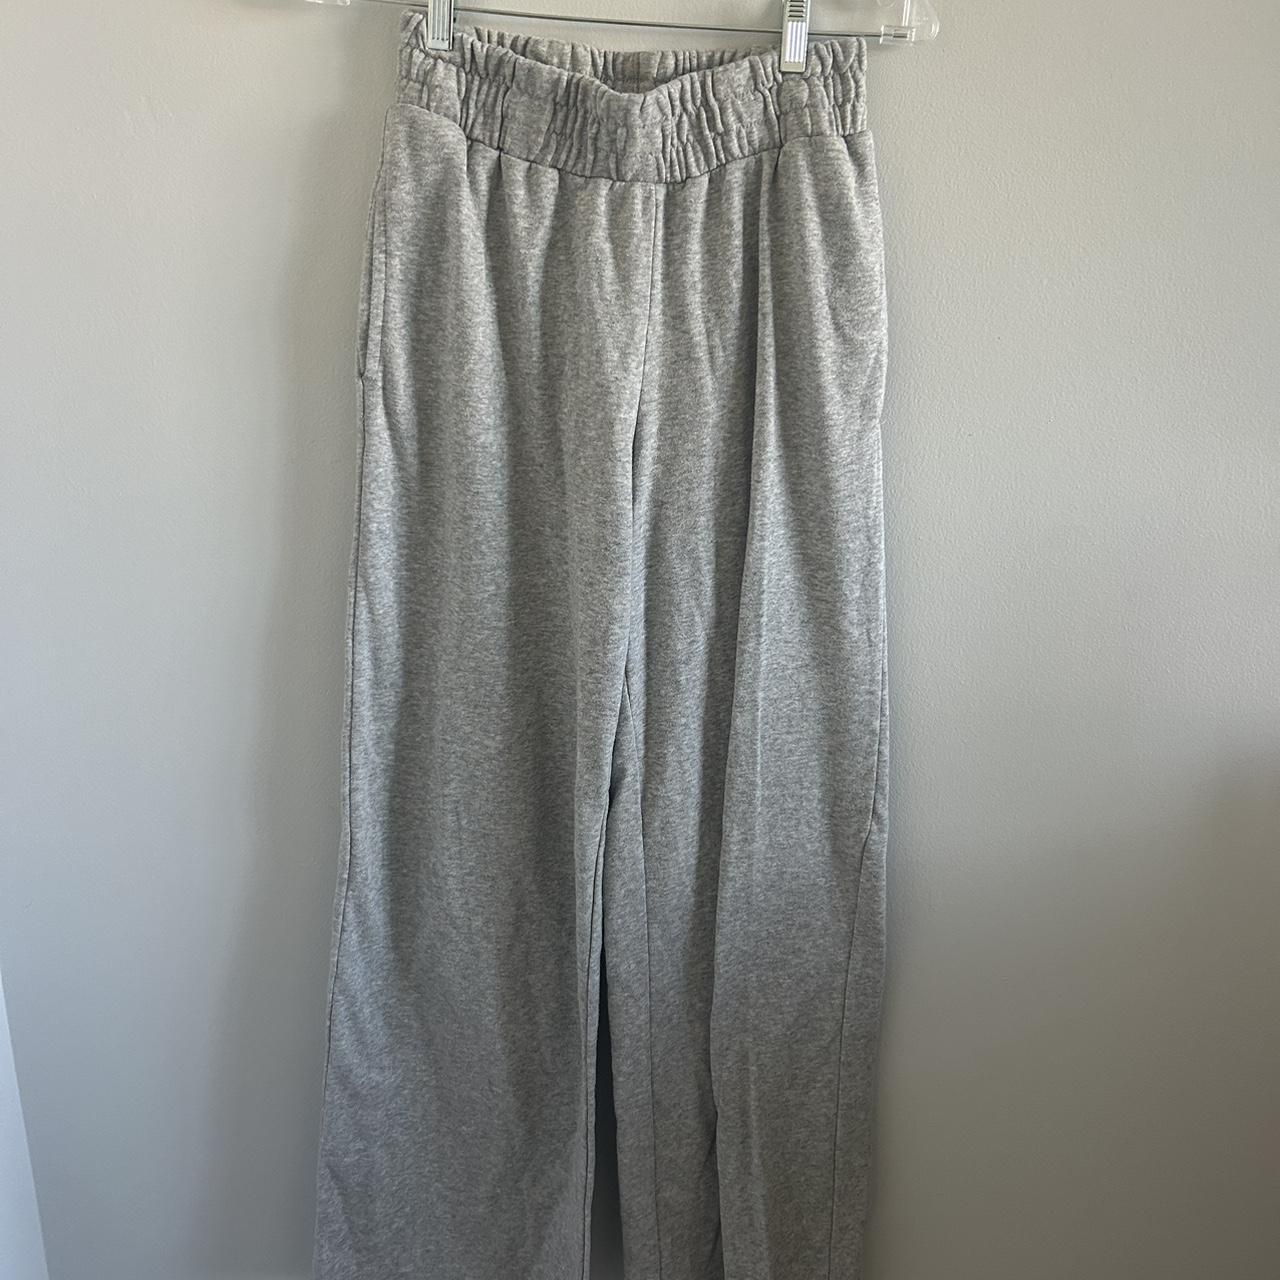 wild fable grey sweatpants with drawstring size - Depop